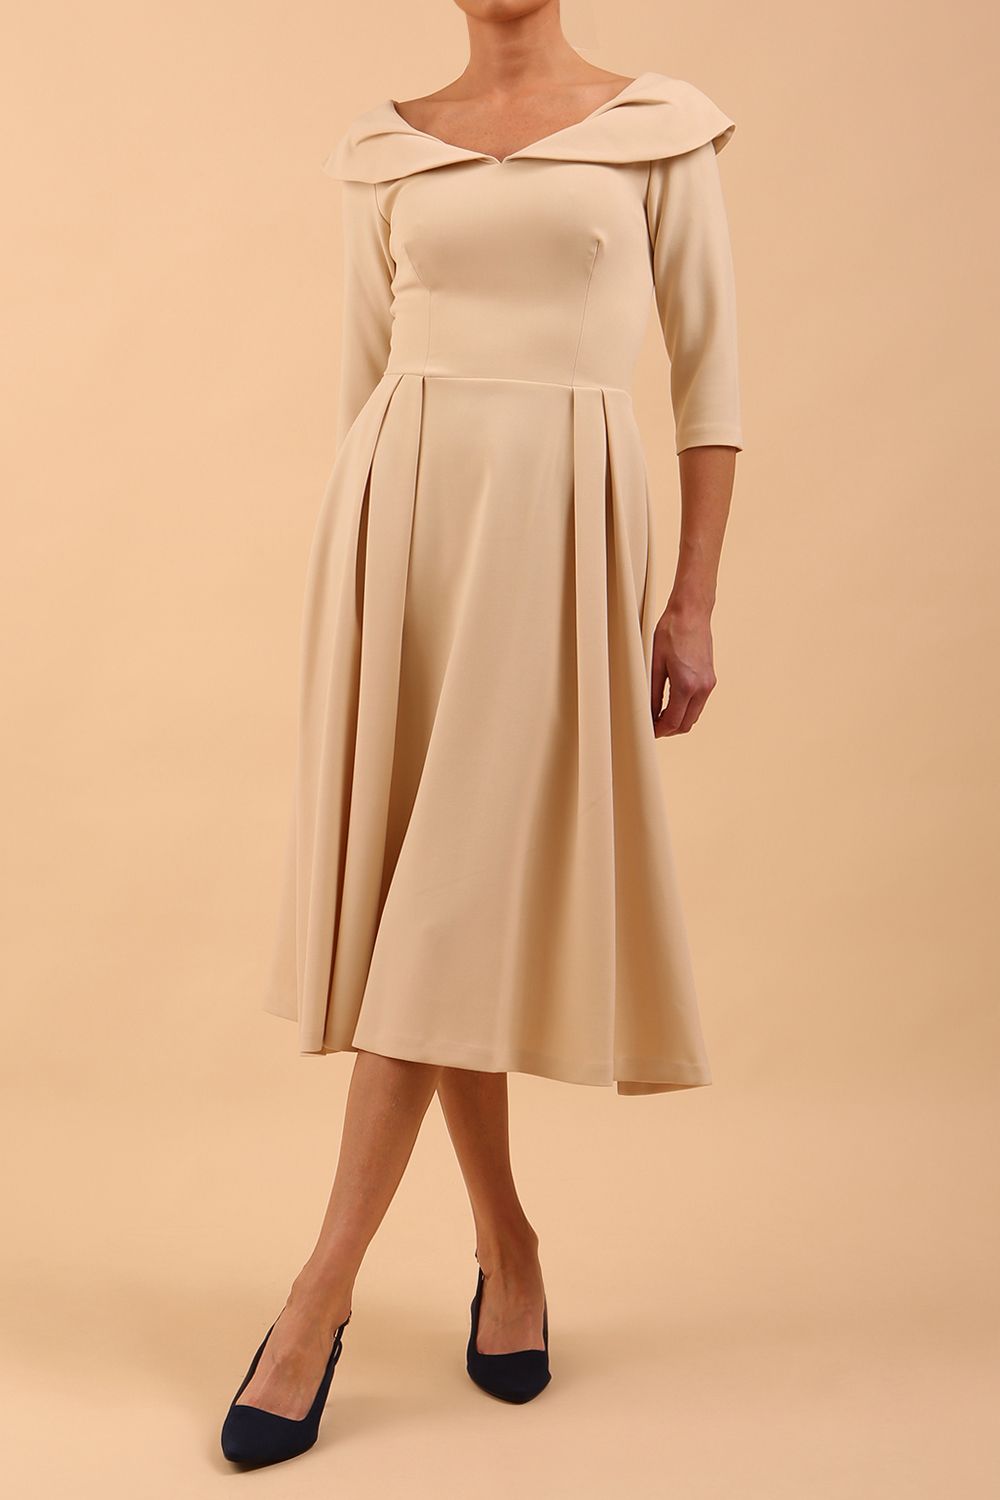 Model wearing Diva Catwalk Chesterton Sleeved dress with oversized collar detail and a-line swing pleated skirt in colour sandshell beige front